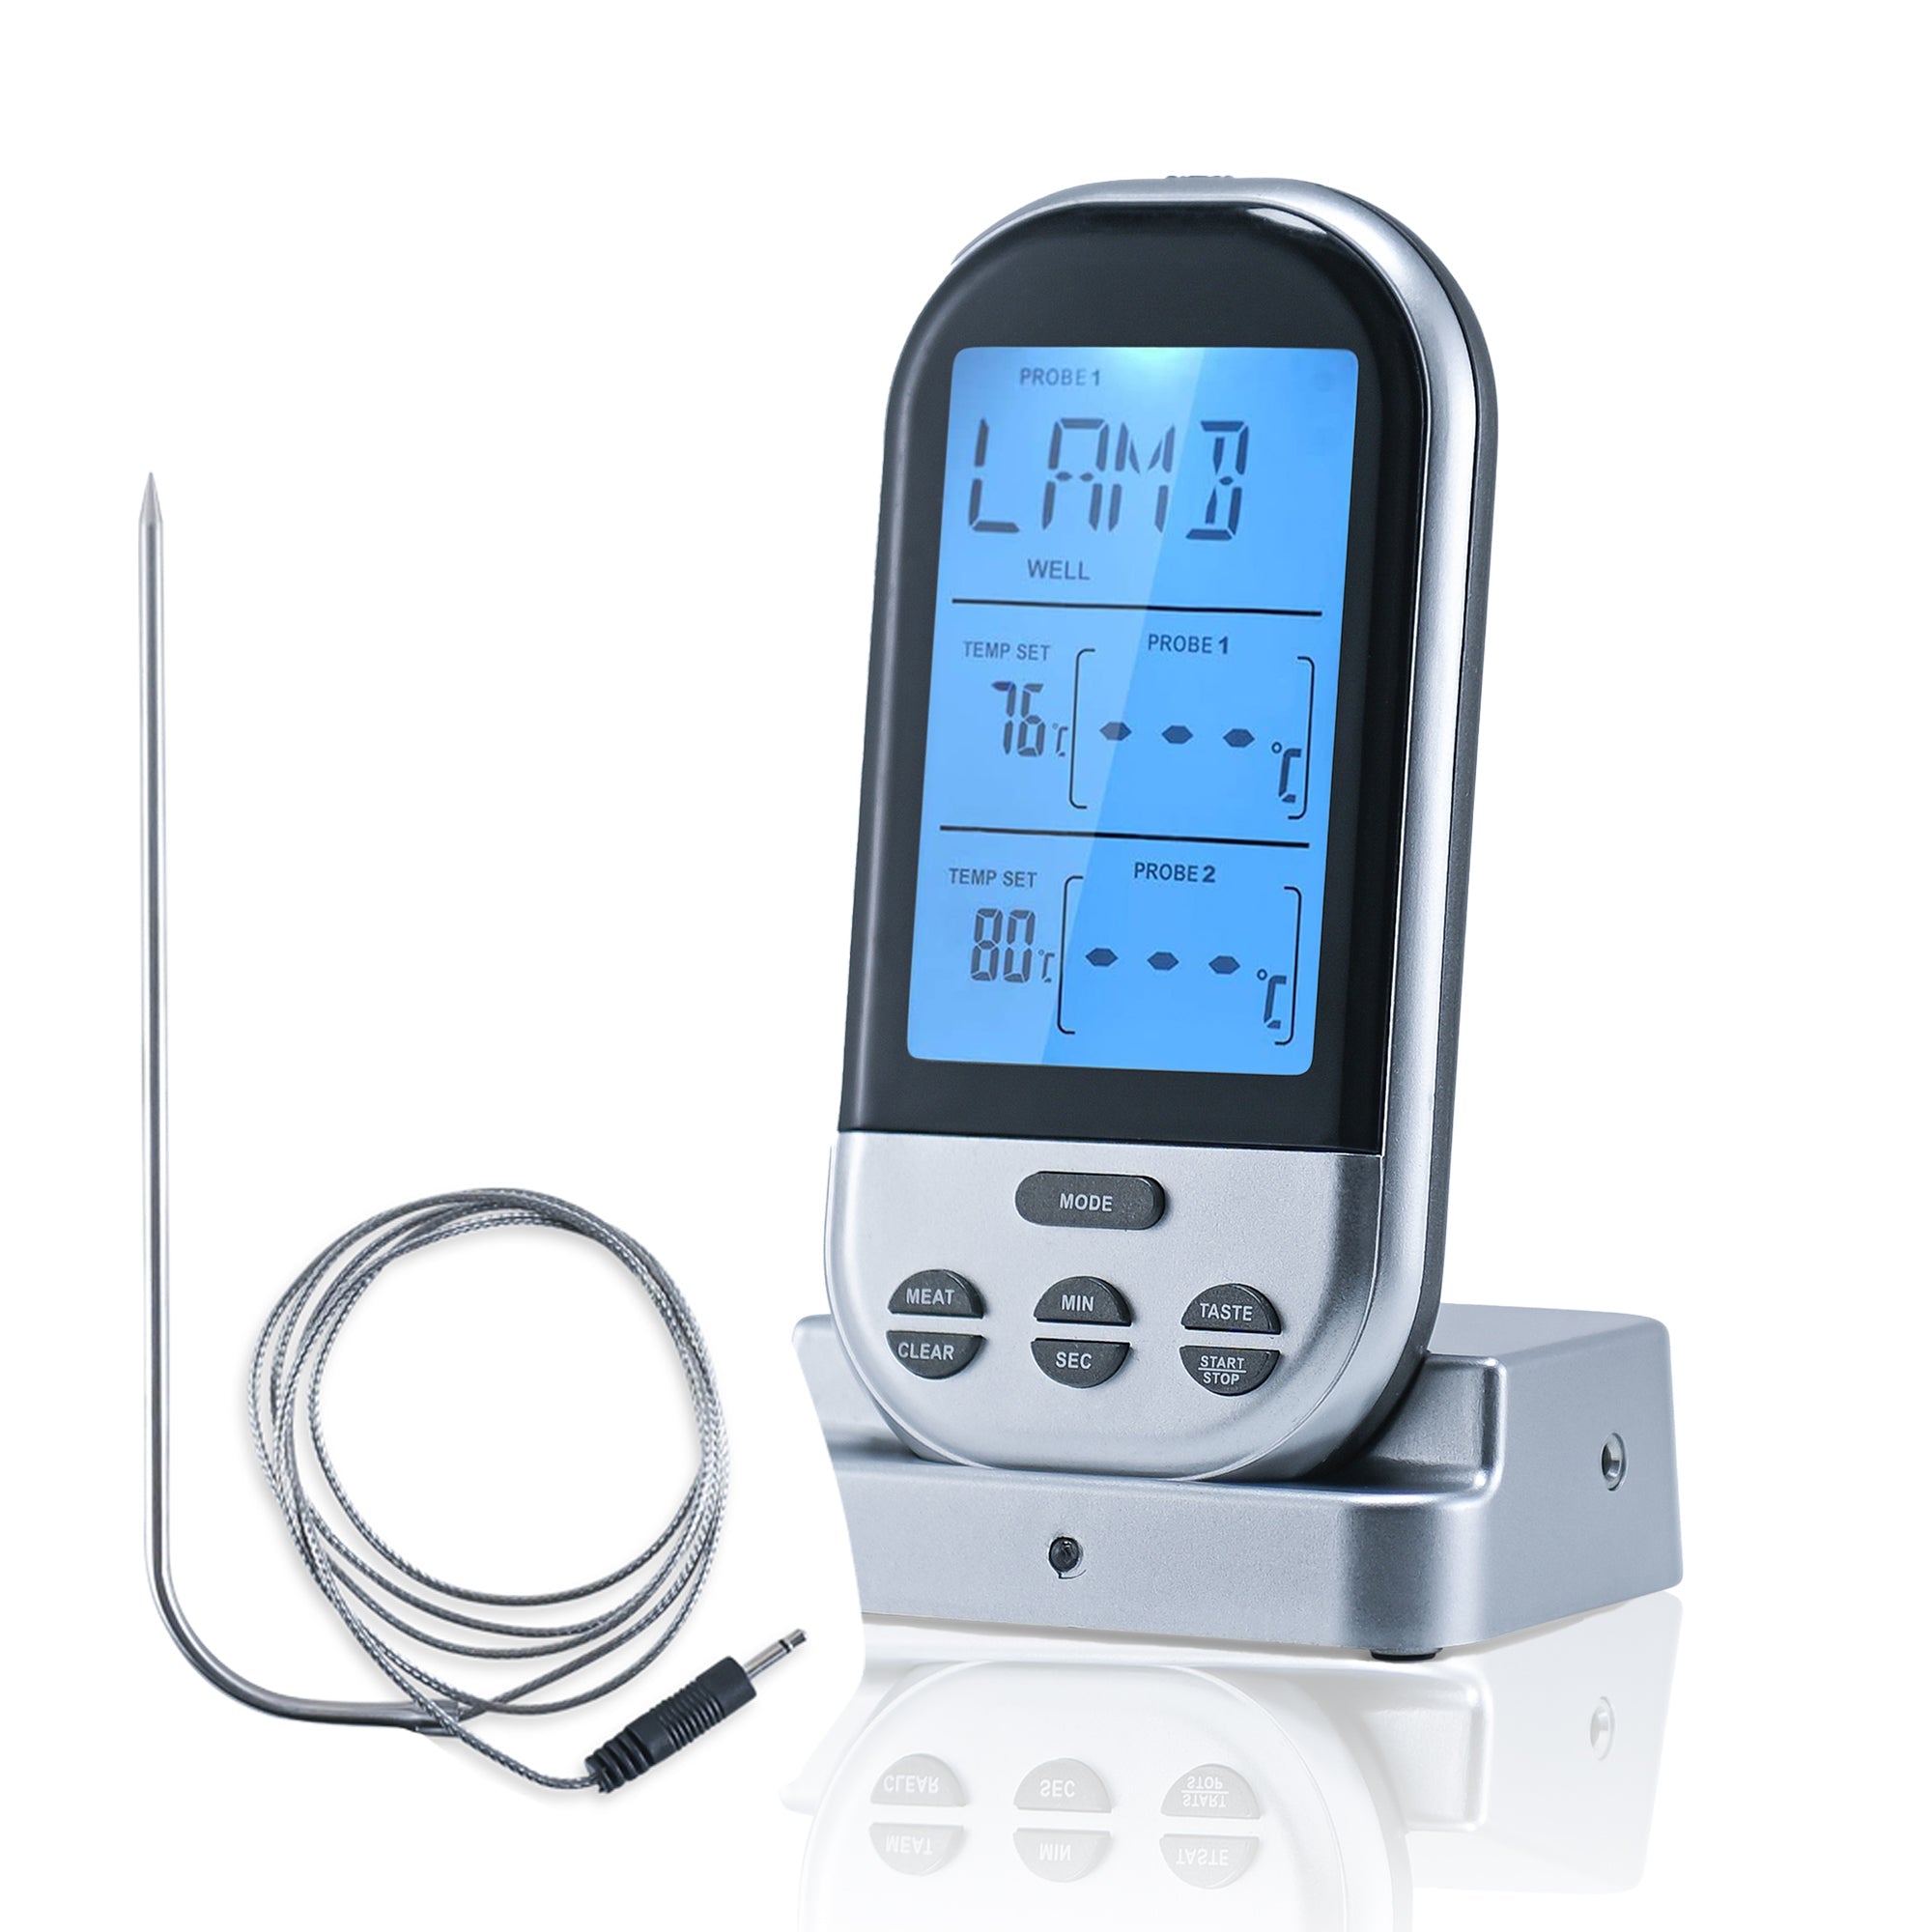 https://cdn.shopify.com/s/files/1/2091/6511/products/cheer-collection-wireless-digital-food-thermometer-426191.jpg?v=1671776739